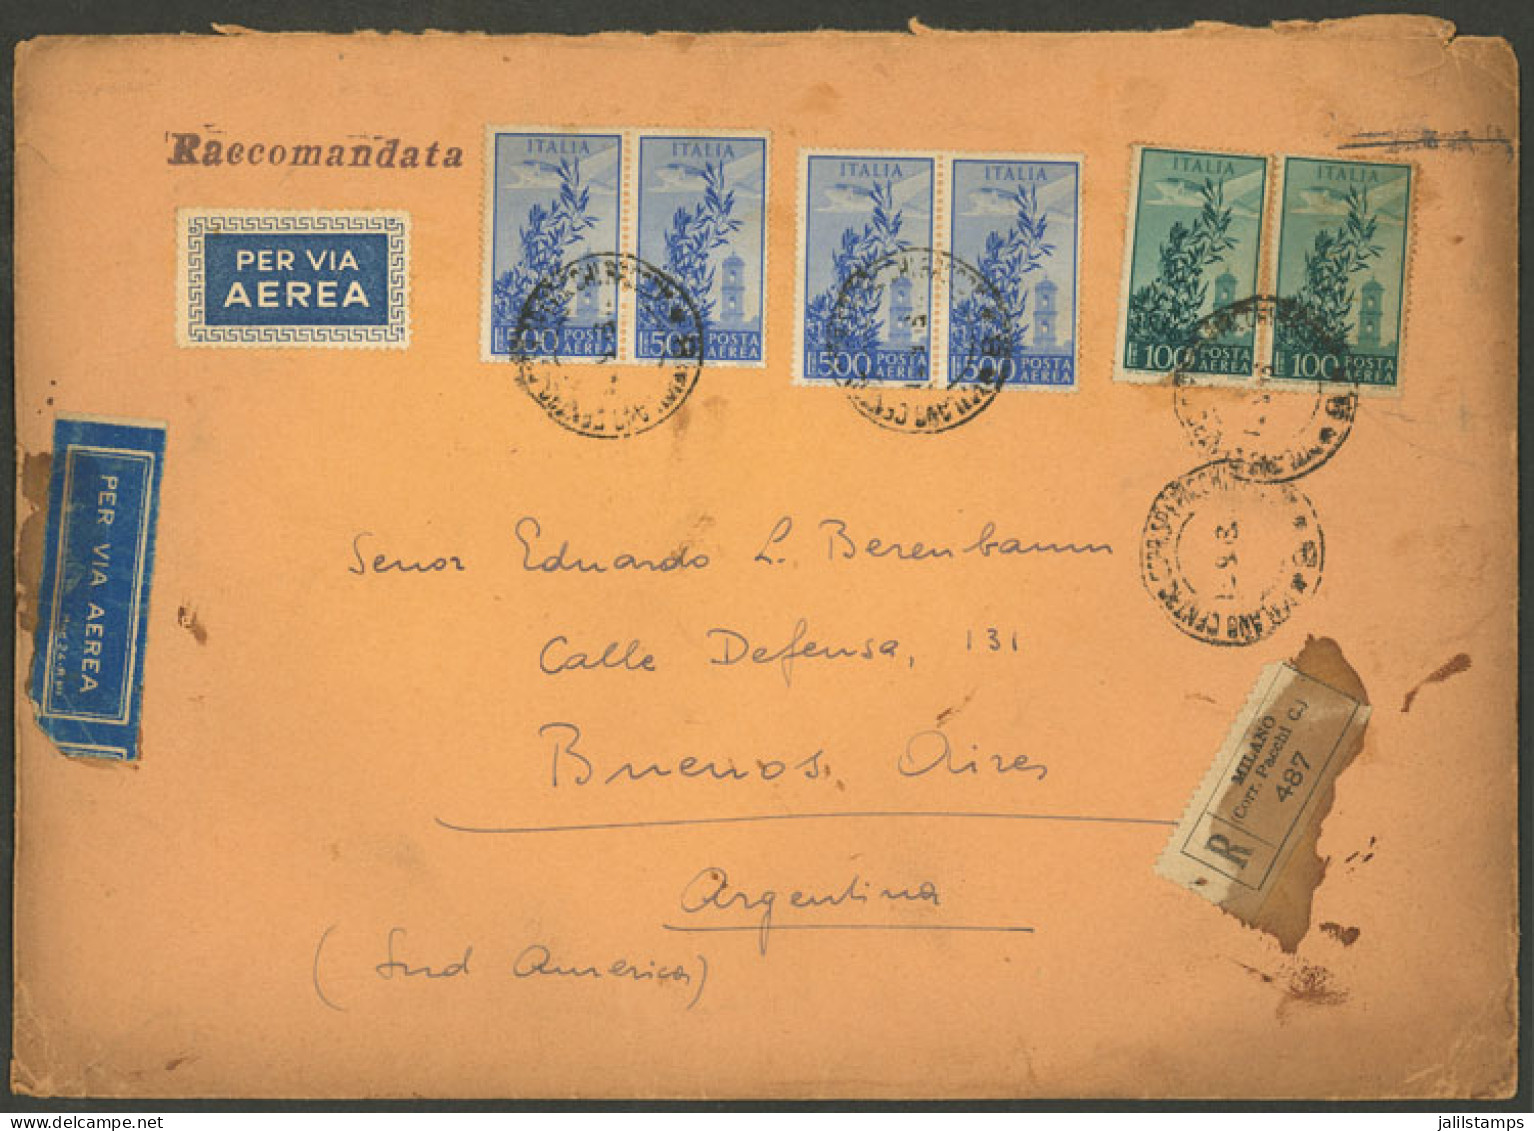 ITALY: 15/SE/1948 Milano - Argentina, Registered Airmail Cover Franked With 2,200 L., Some Small Defects, Very Nice! - Unclassified